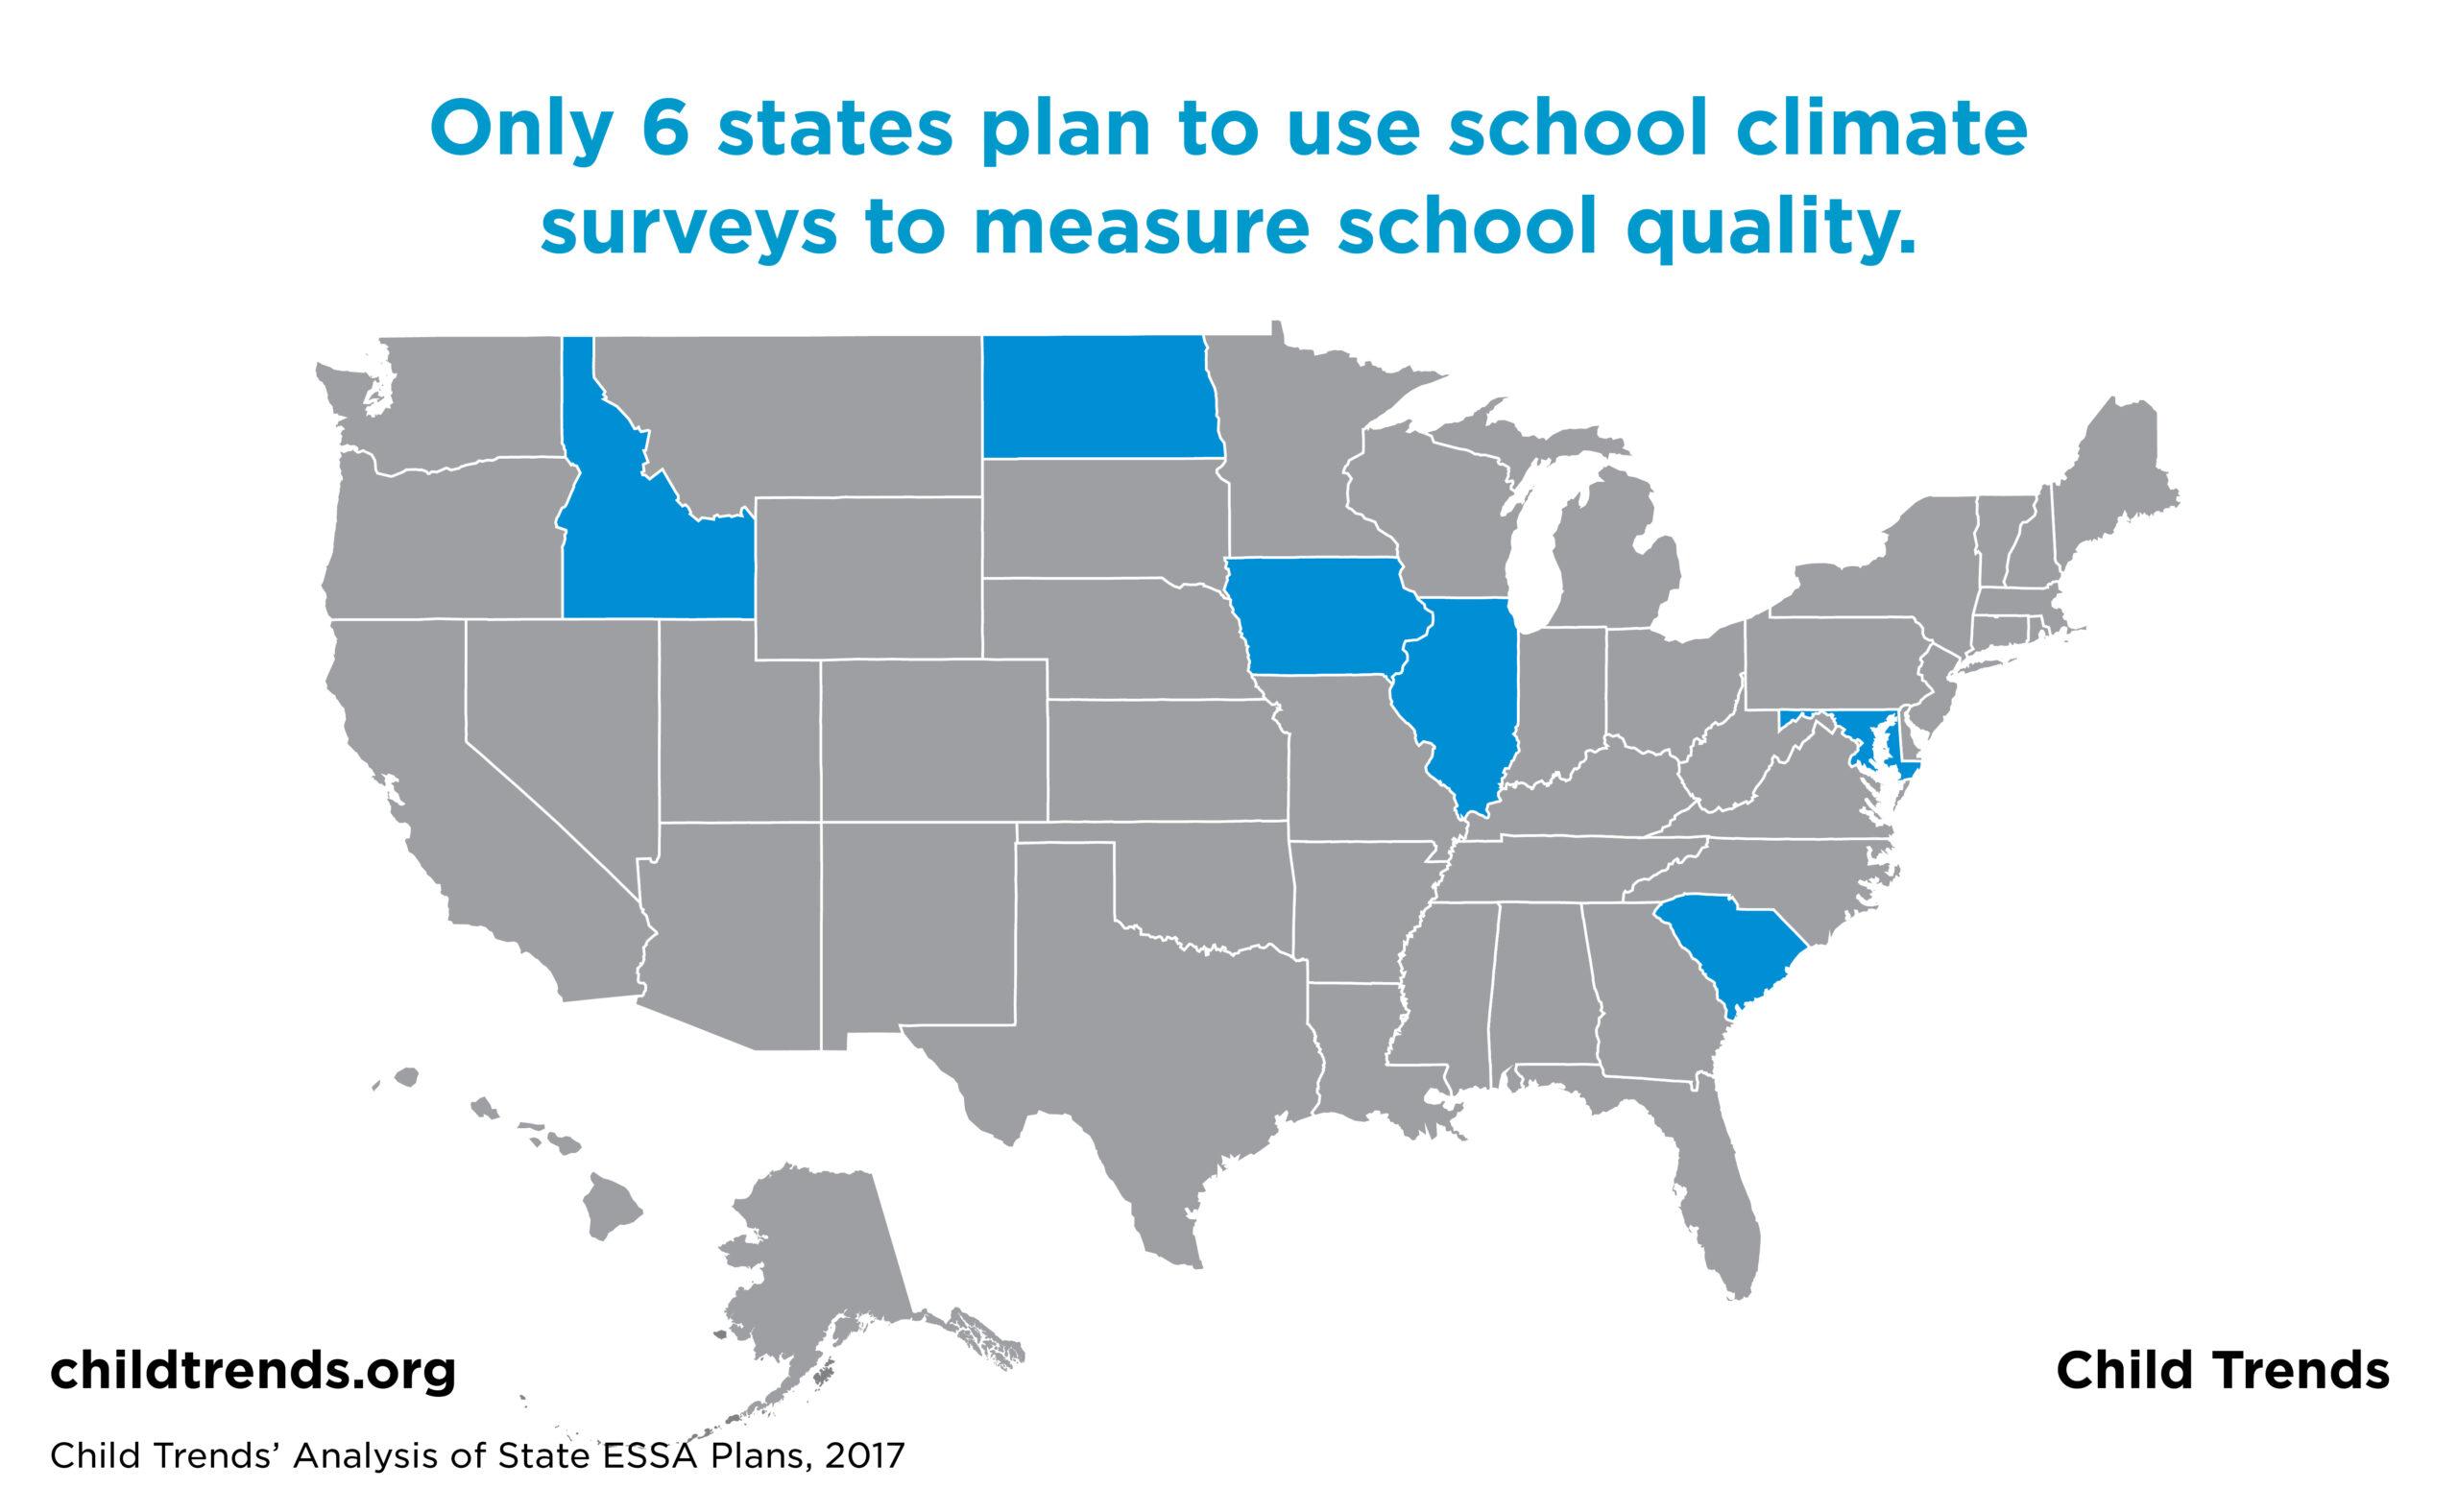 Only 6 states plan to use school climate surveys to measure student quality.